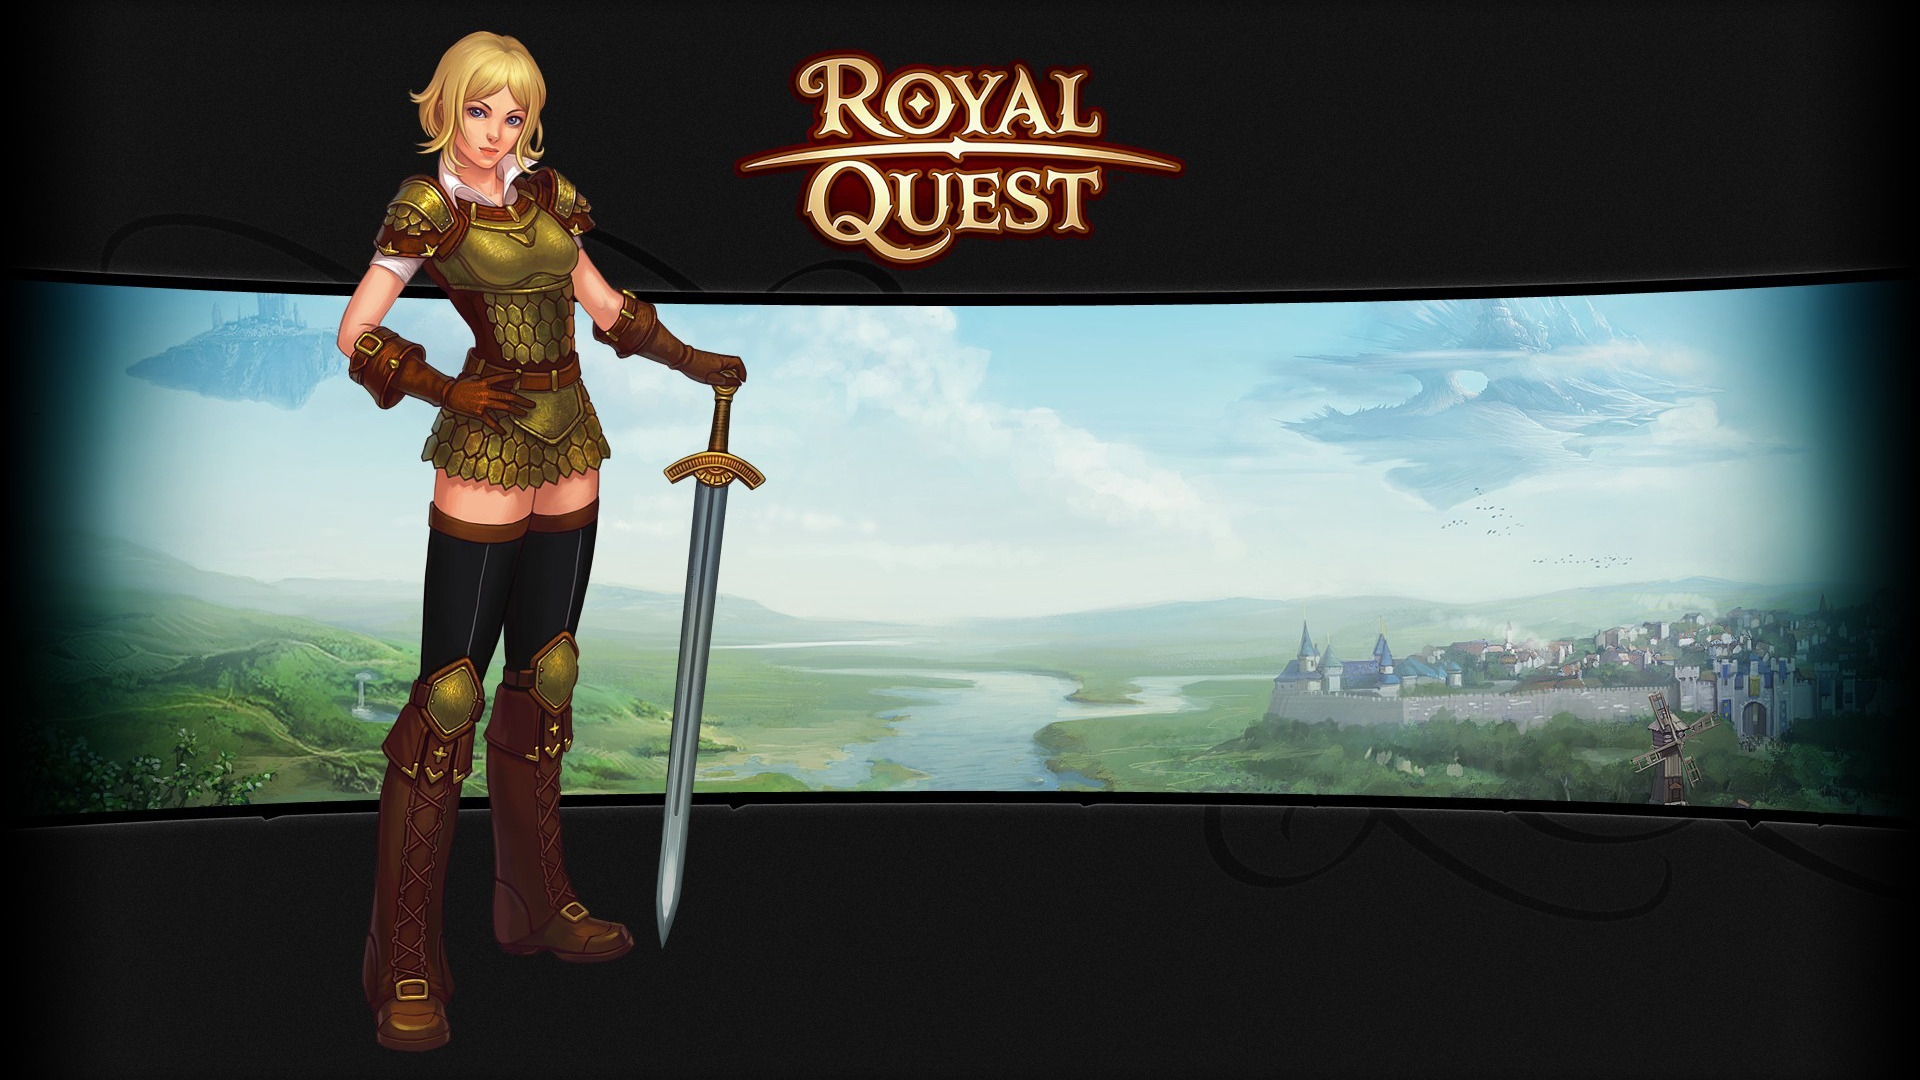 Royal Quest for 1920 x 1080 HDTV 1080p resolution